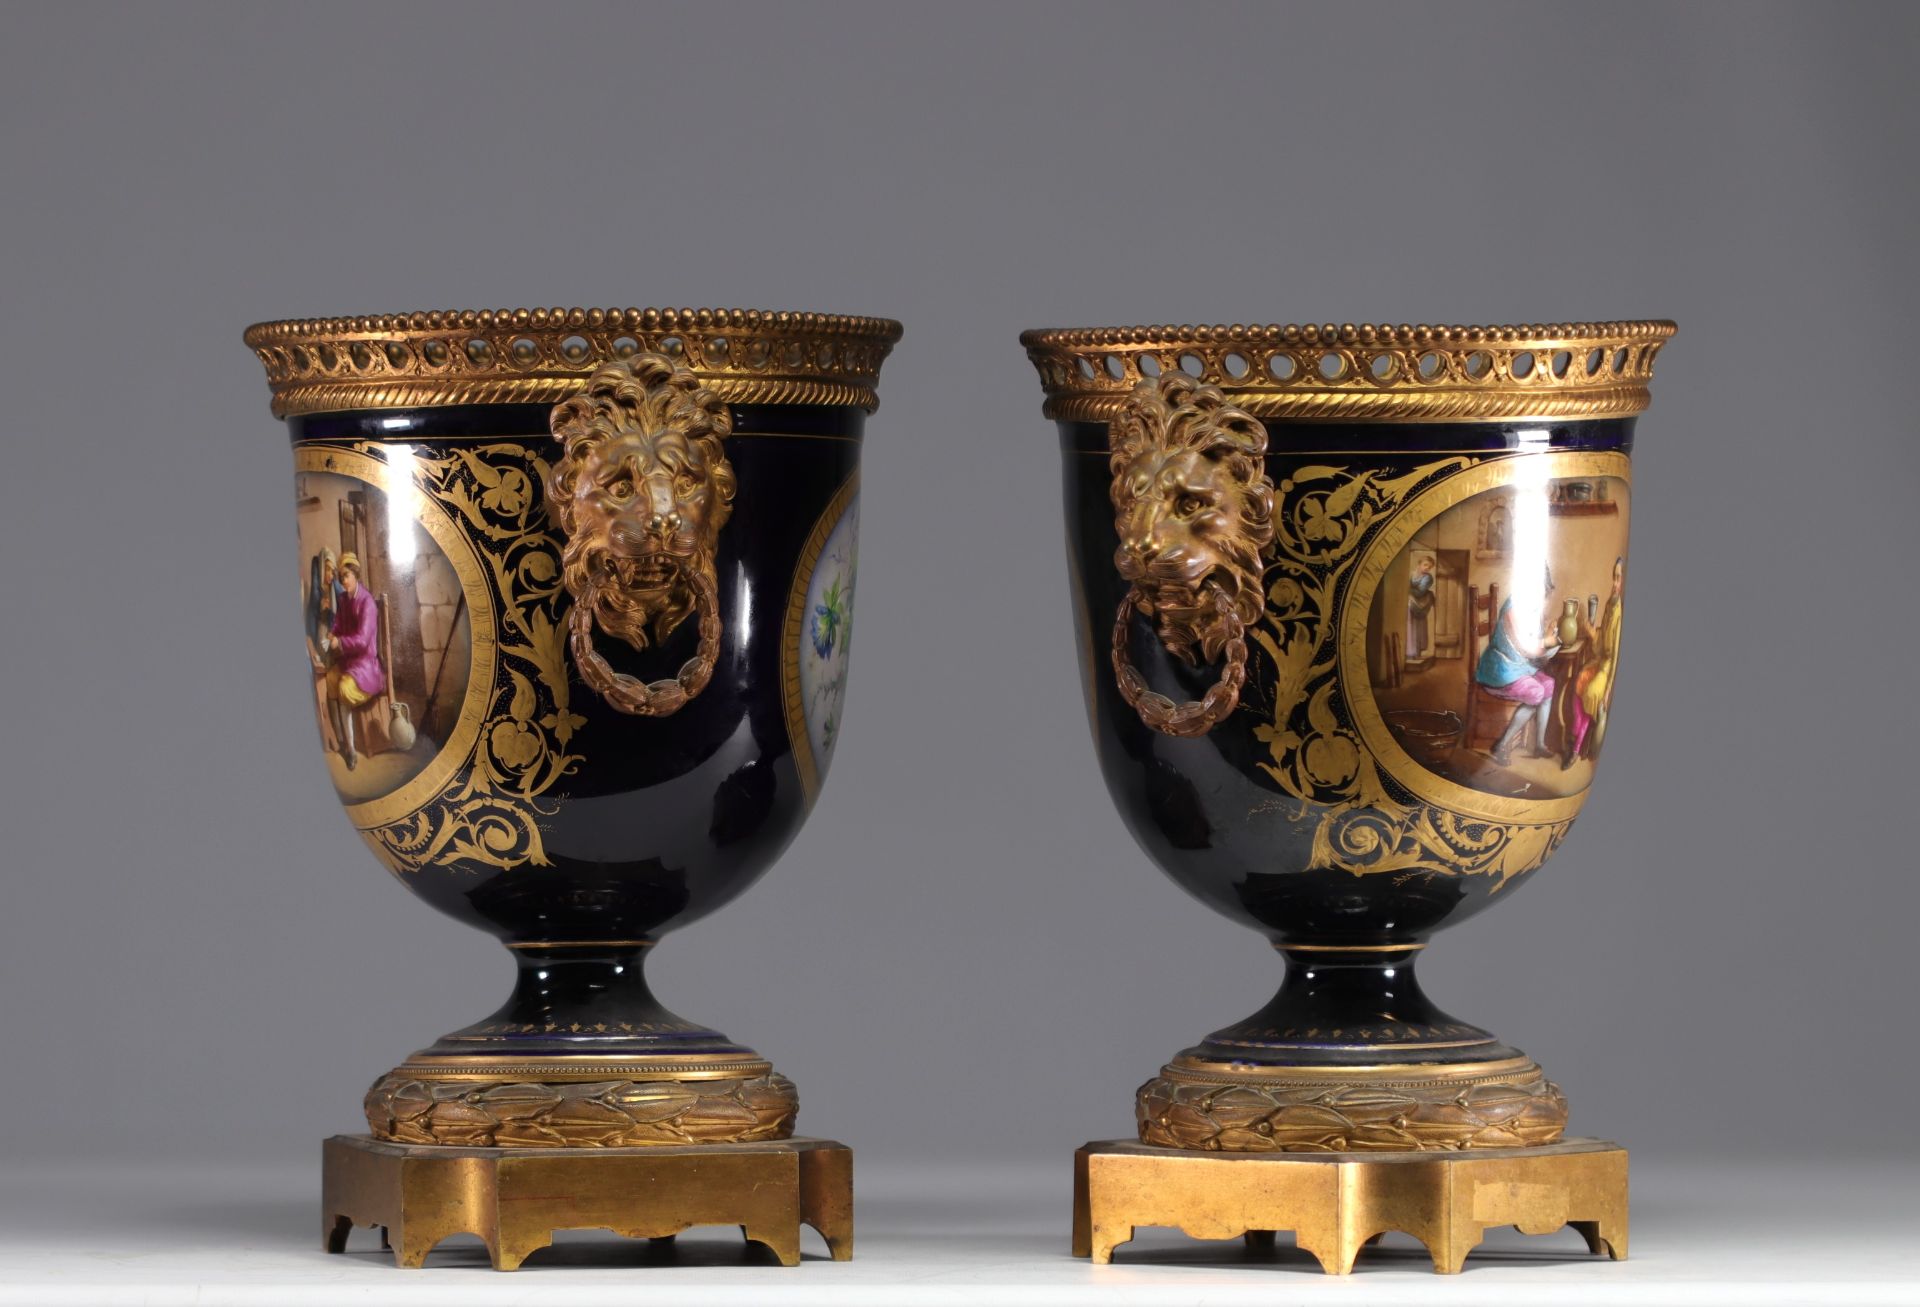 Pair of Sevres porcelain vases mounted on bronze, 19th century. - Image 2 of 4